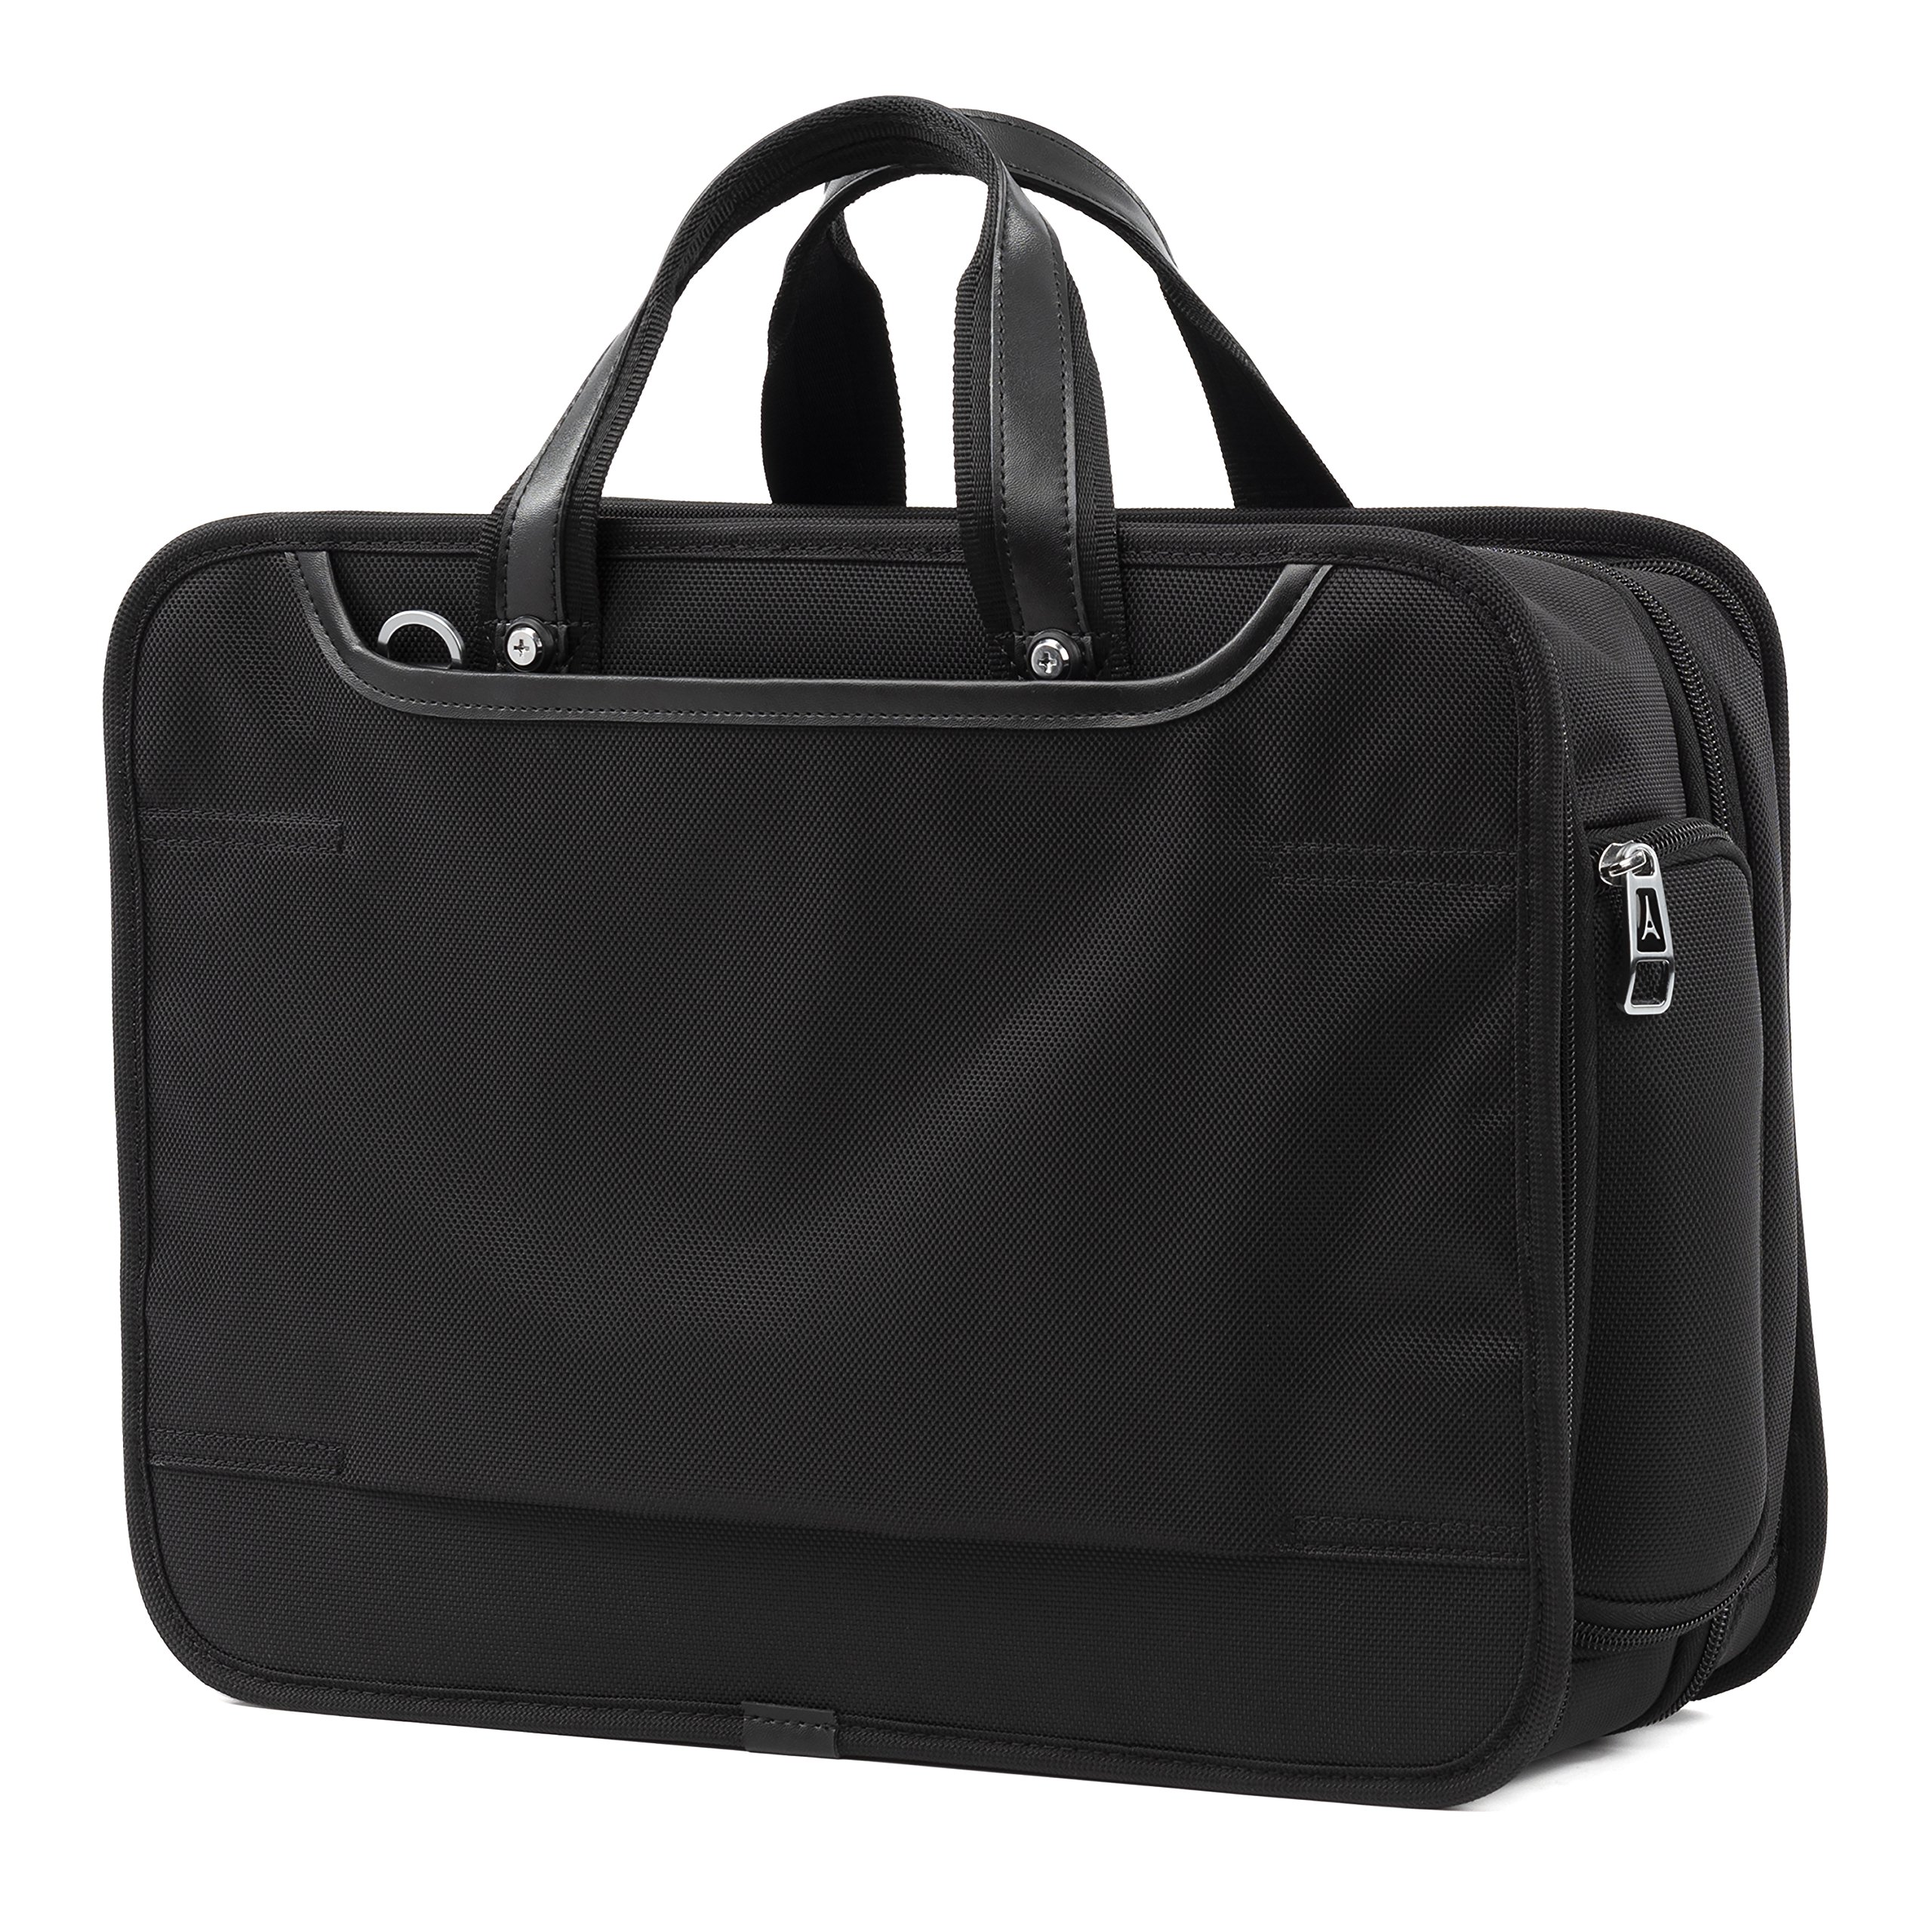 Travelpro Platinum Elite Expandable Business Laptop Briefcase, Fits up to 15.6 Laptop, Work School Travel, Men and Women, Shadow Black